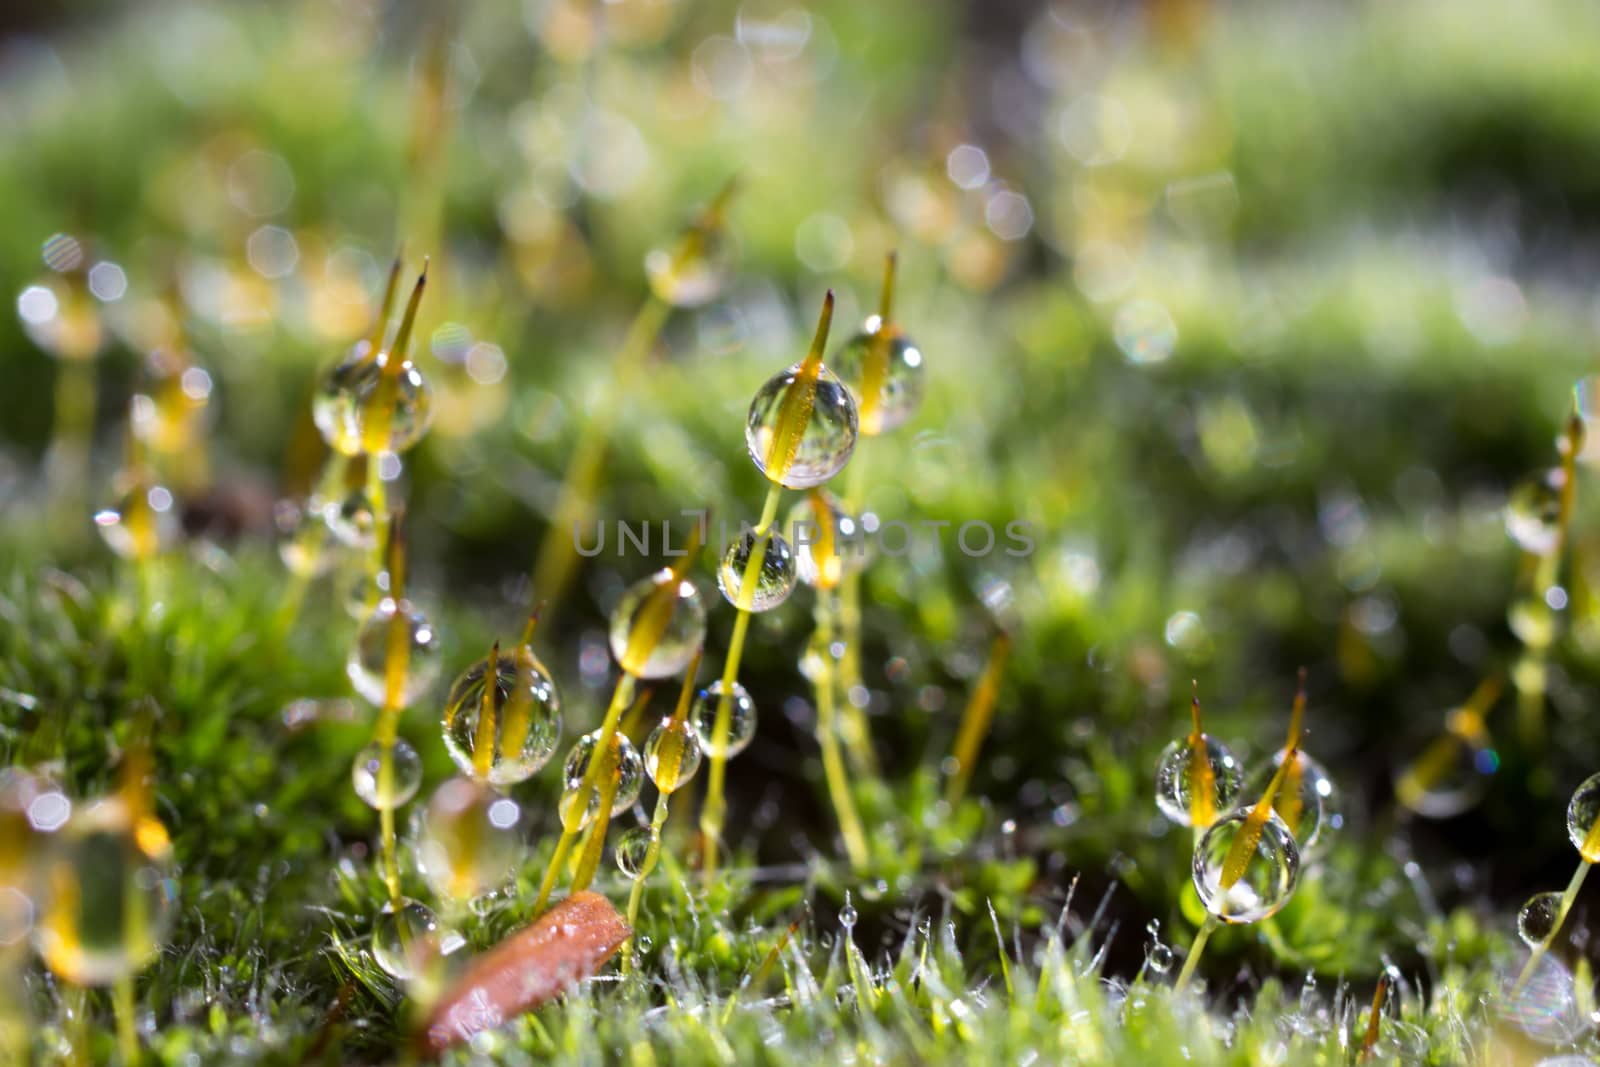 Morning dew on mossy grass by ernest_davies